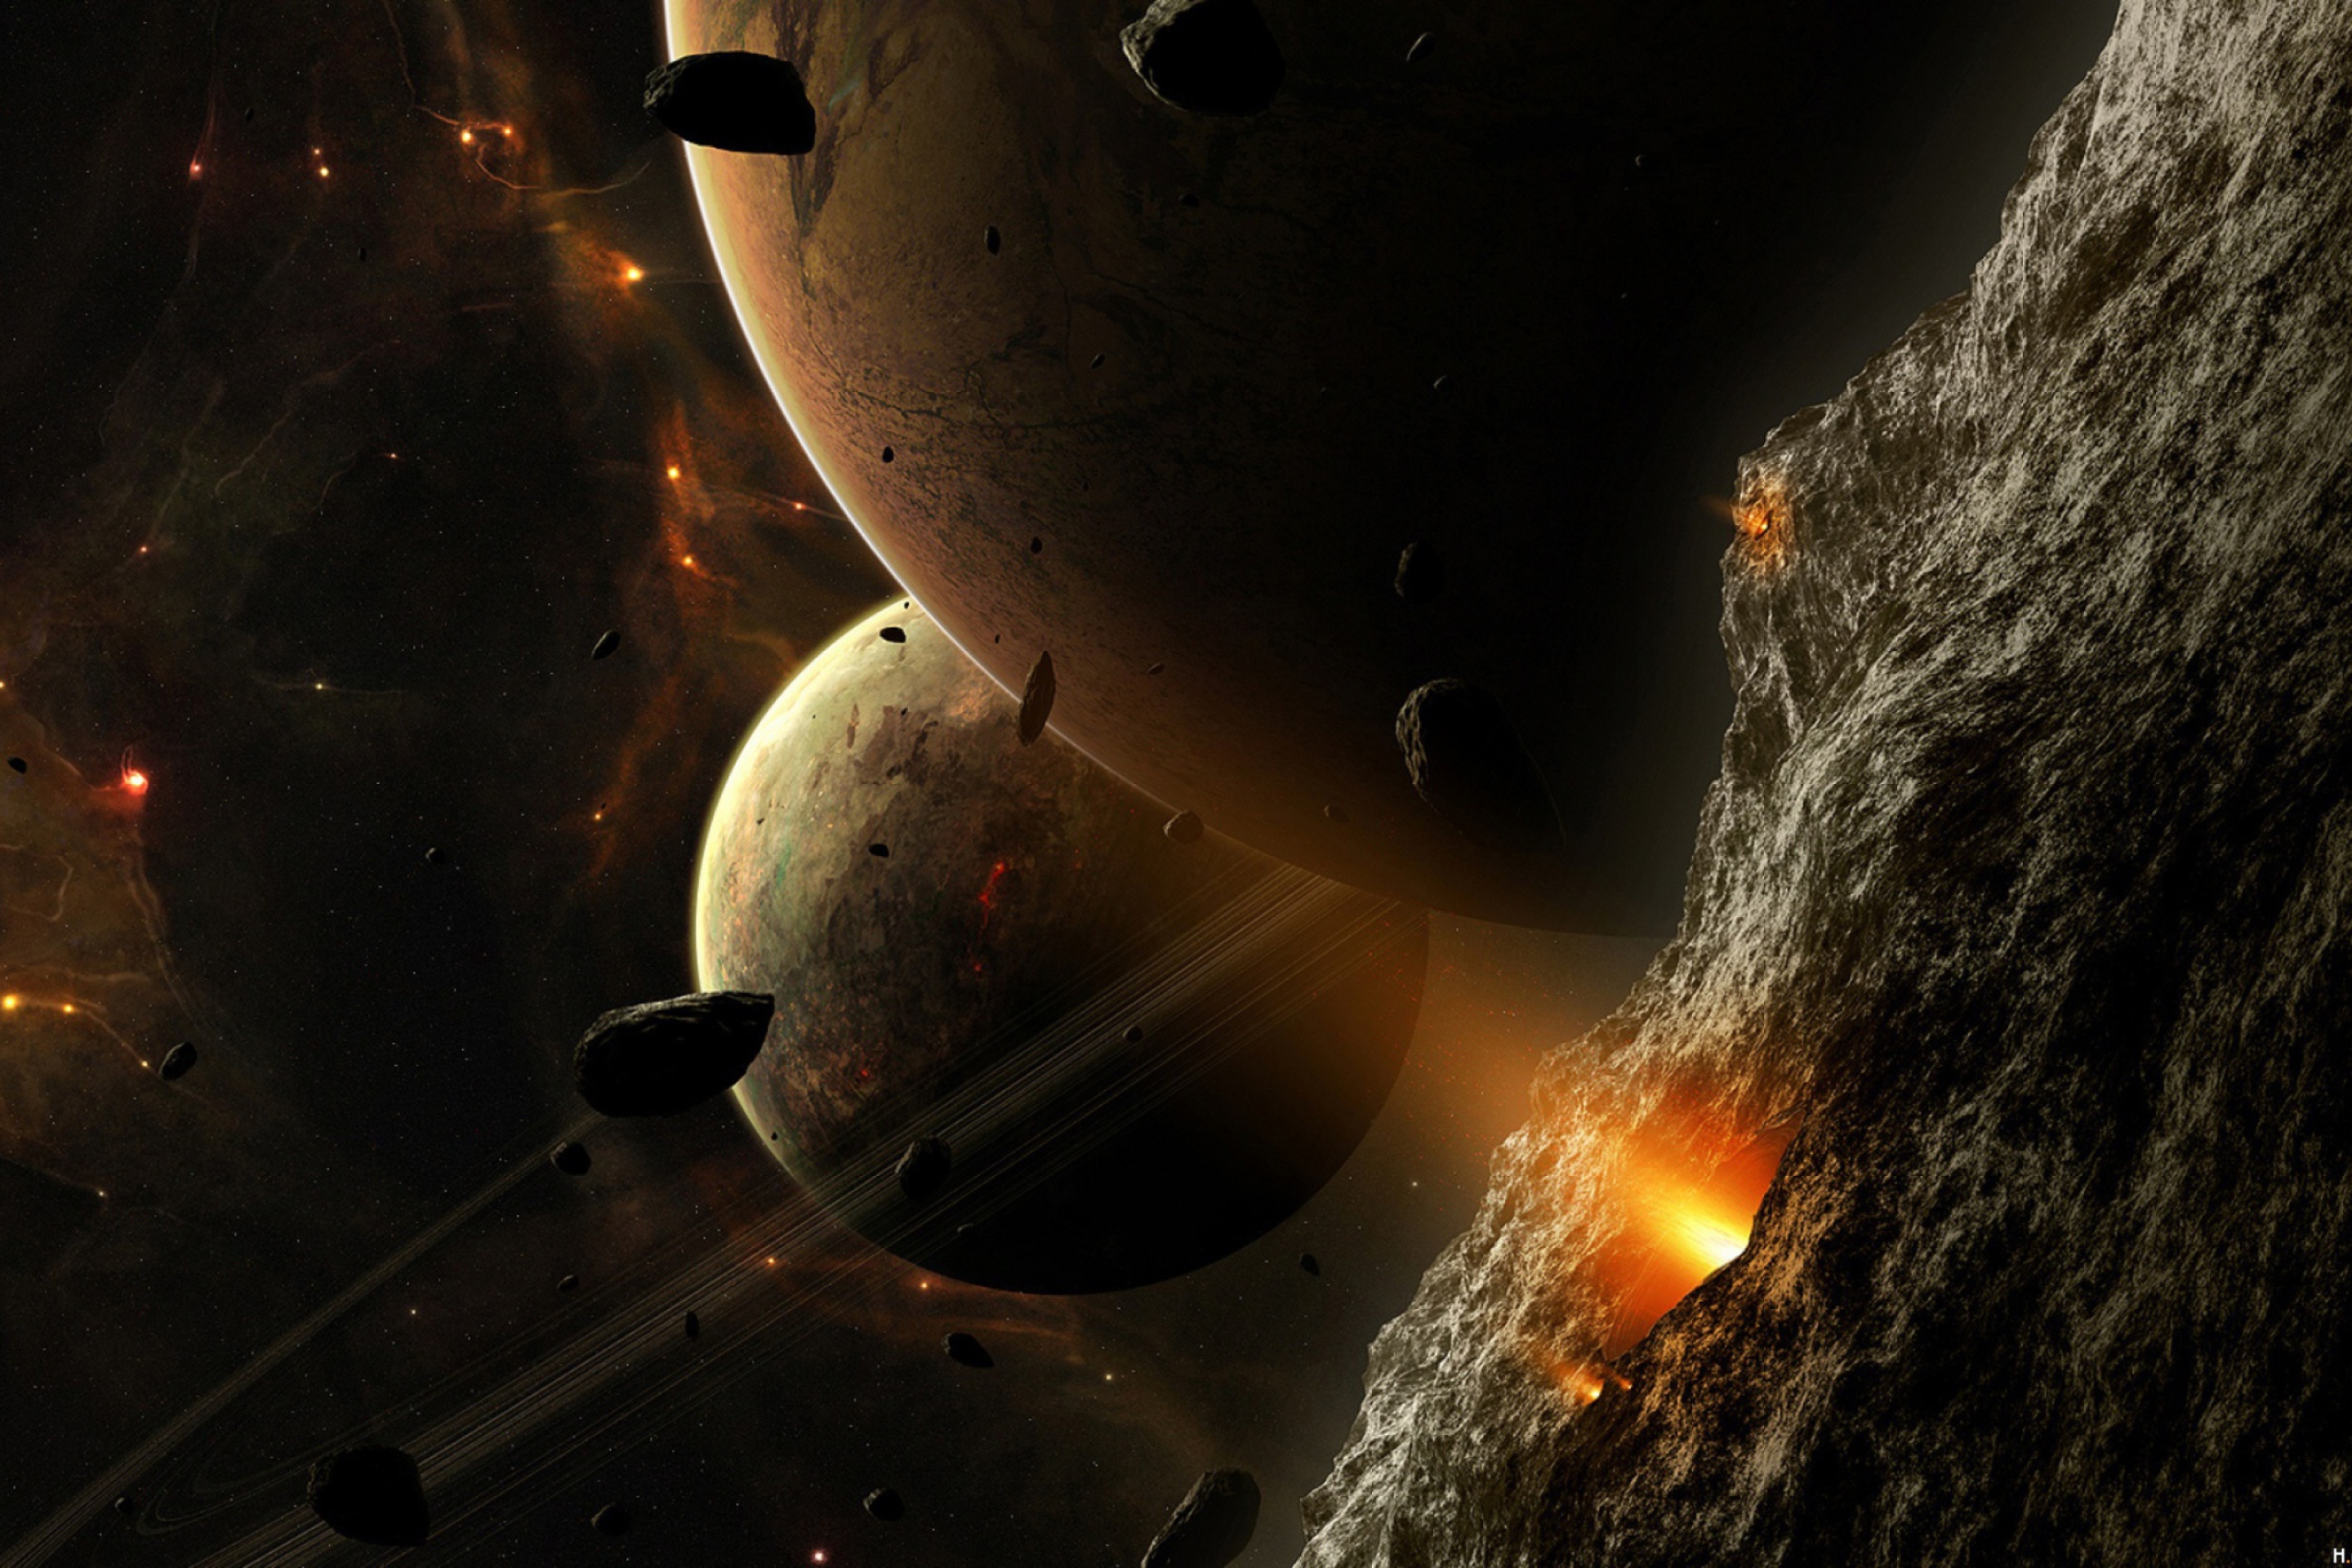 Asteroids And Planets wallpaper 2880x1920